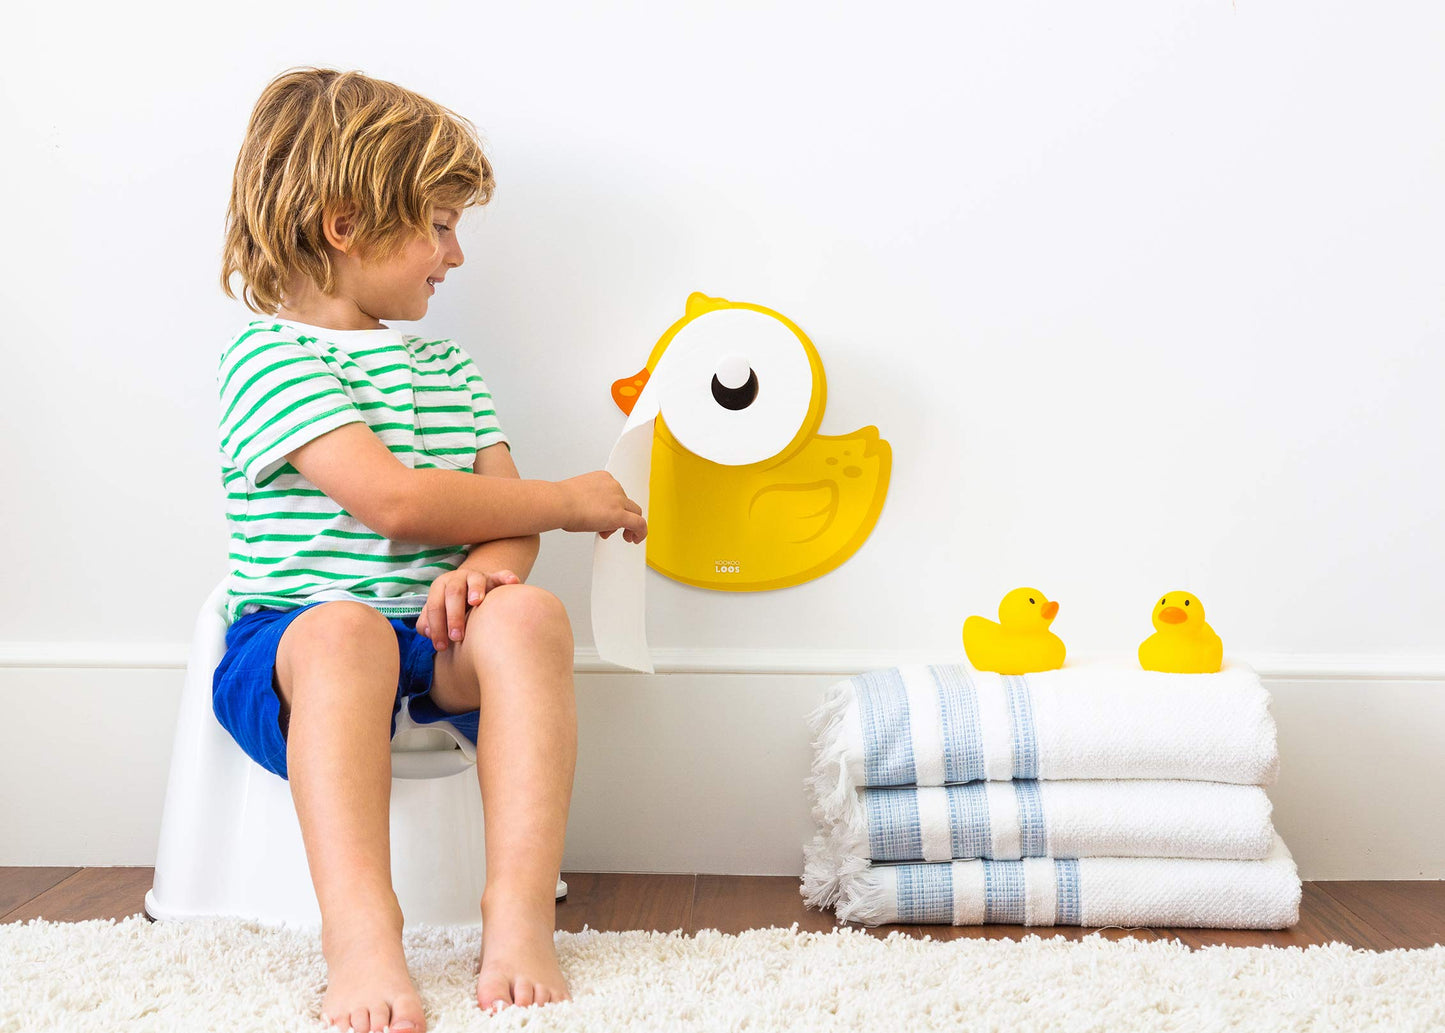 KooKooDucky Potty Training Accessory Toilet Paper Holder and Bathroom Decoration Ducky